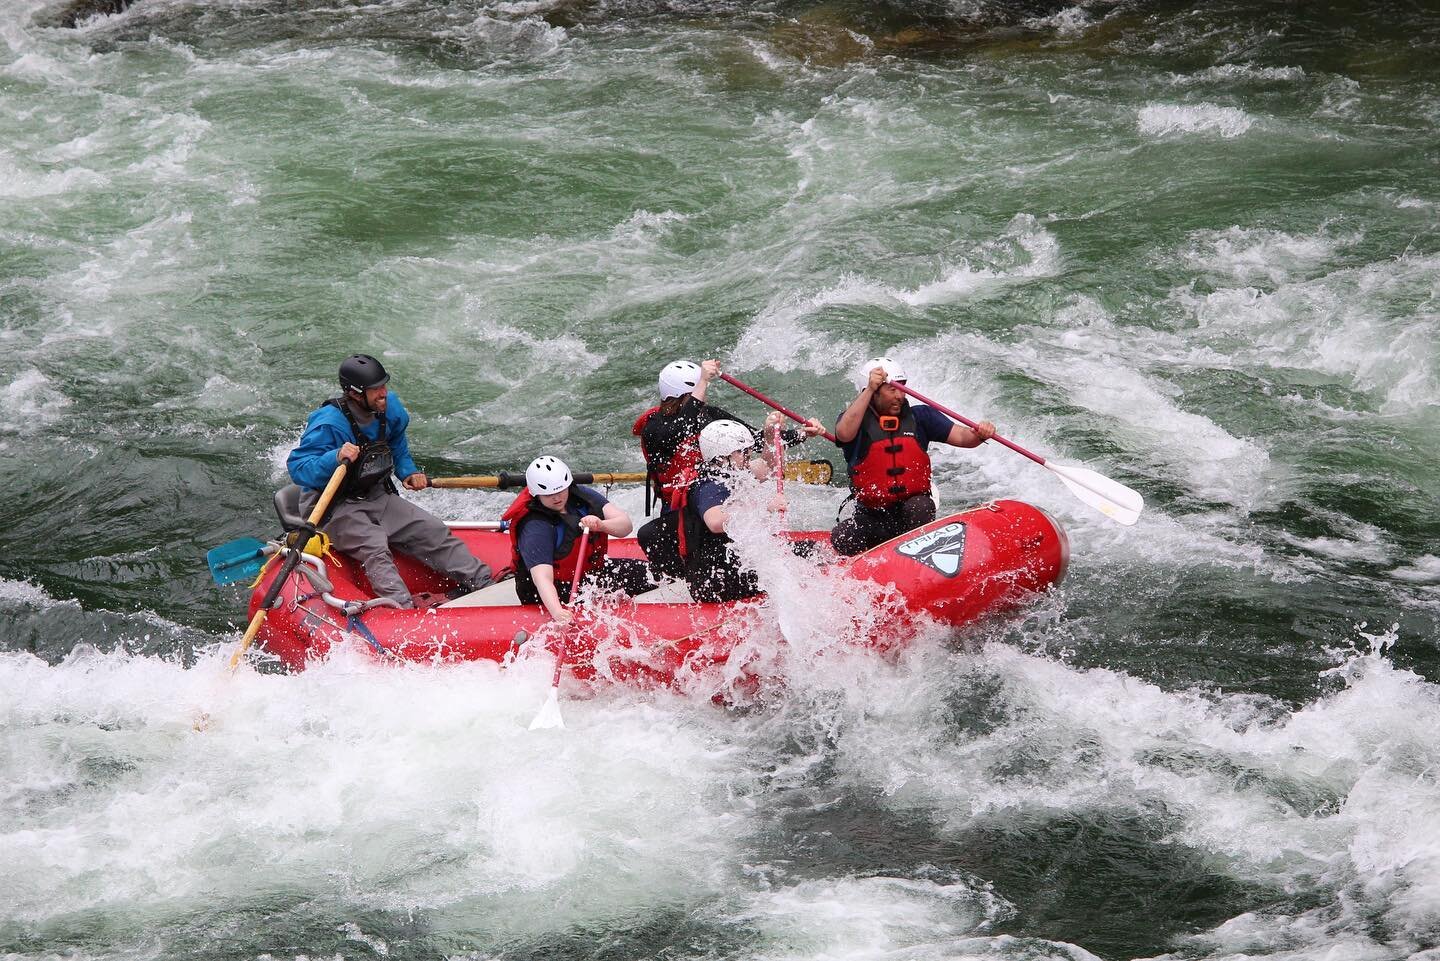 From beautiful views of the North Cascades, to paddling some splashy class III waves, rafting on the Skagit river is always an adventure!

Photos taken on the land of the Upper Skagit Tribe

#northcascadesnationalpark #skagitriver #whitewater #raftin